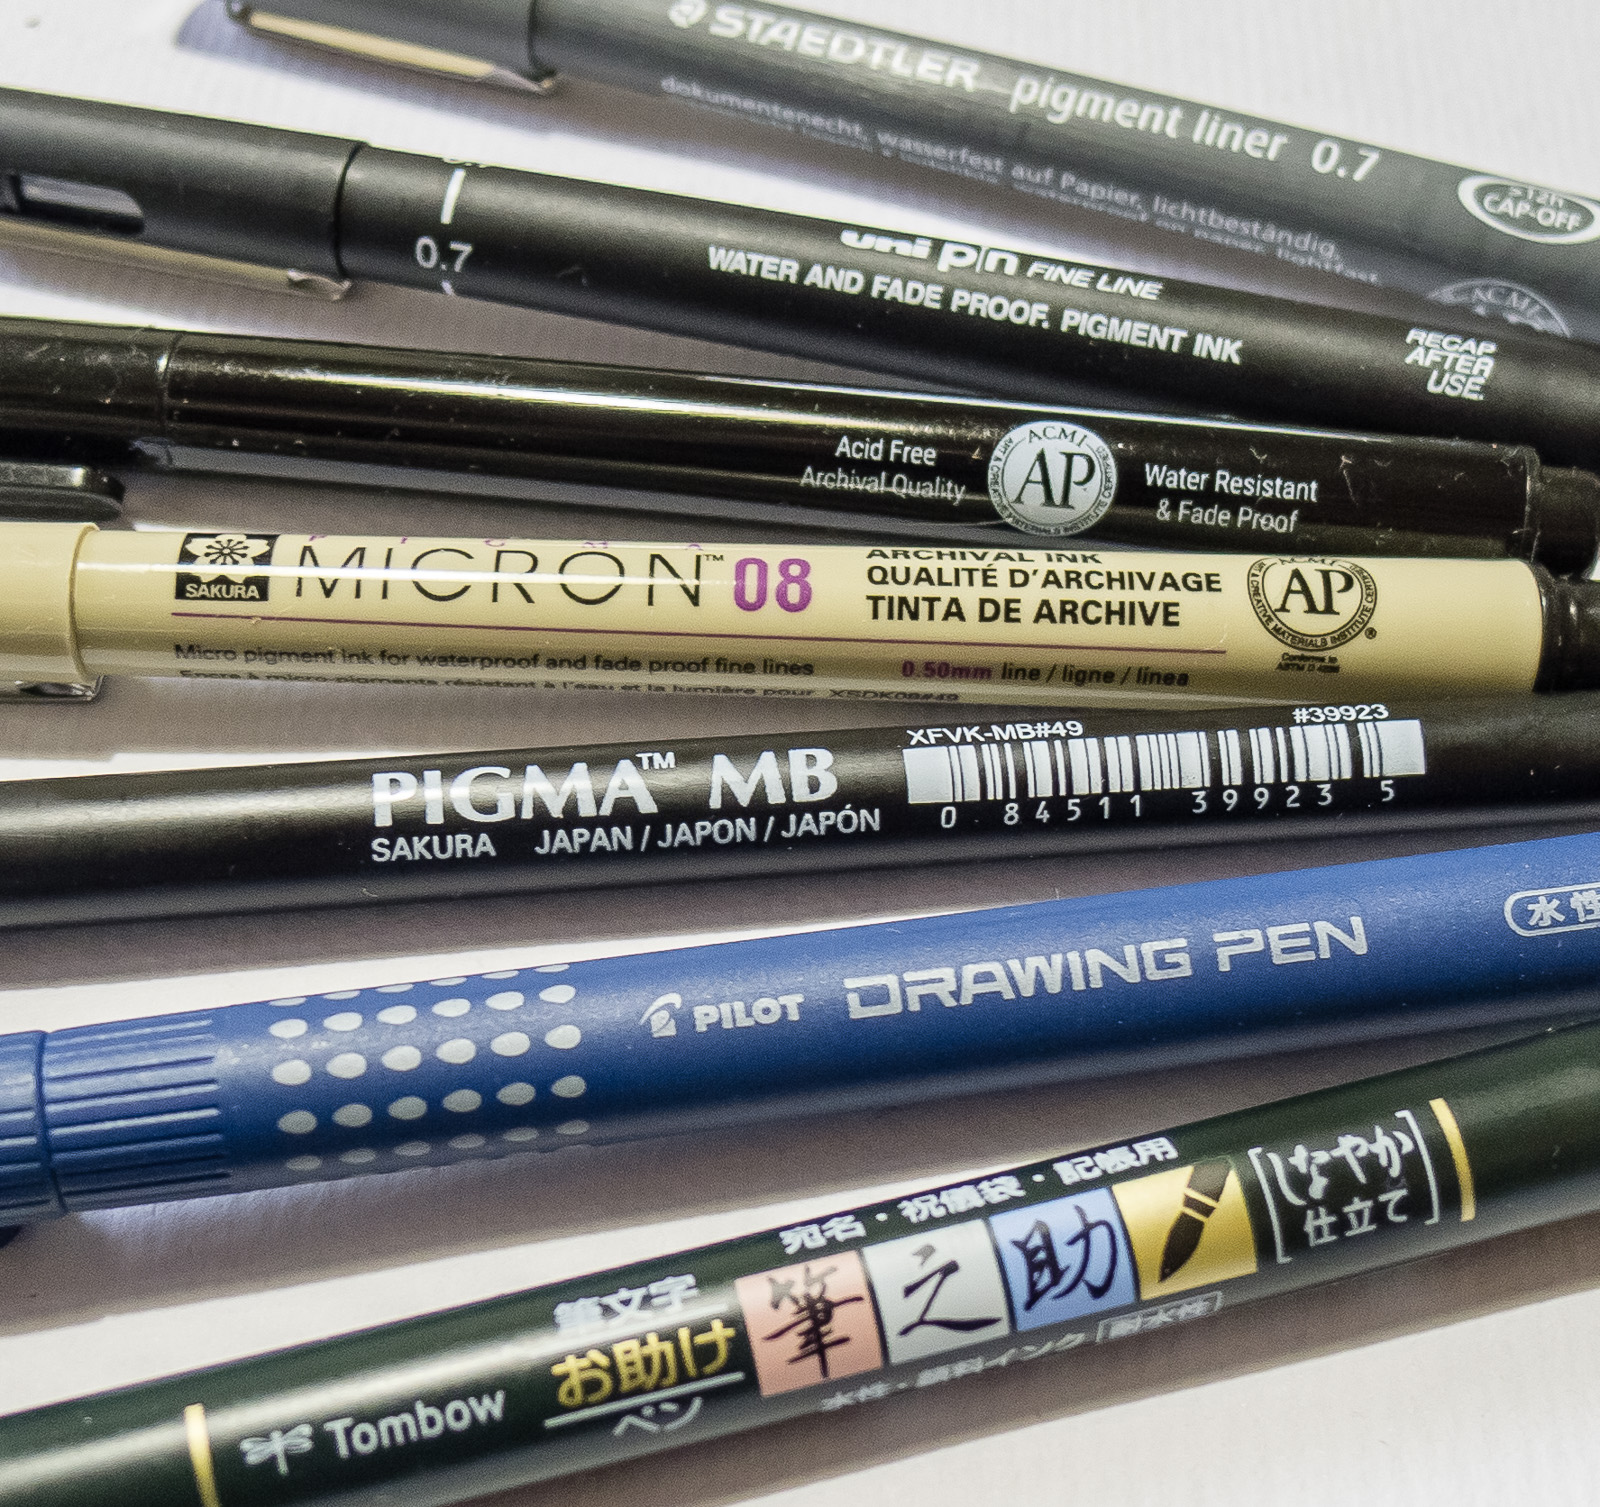 A review of Staedtler's Pigment Liners - The Pen Company Blog